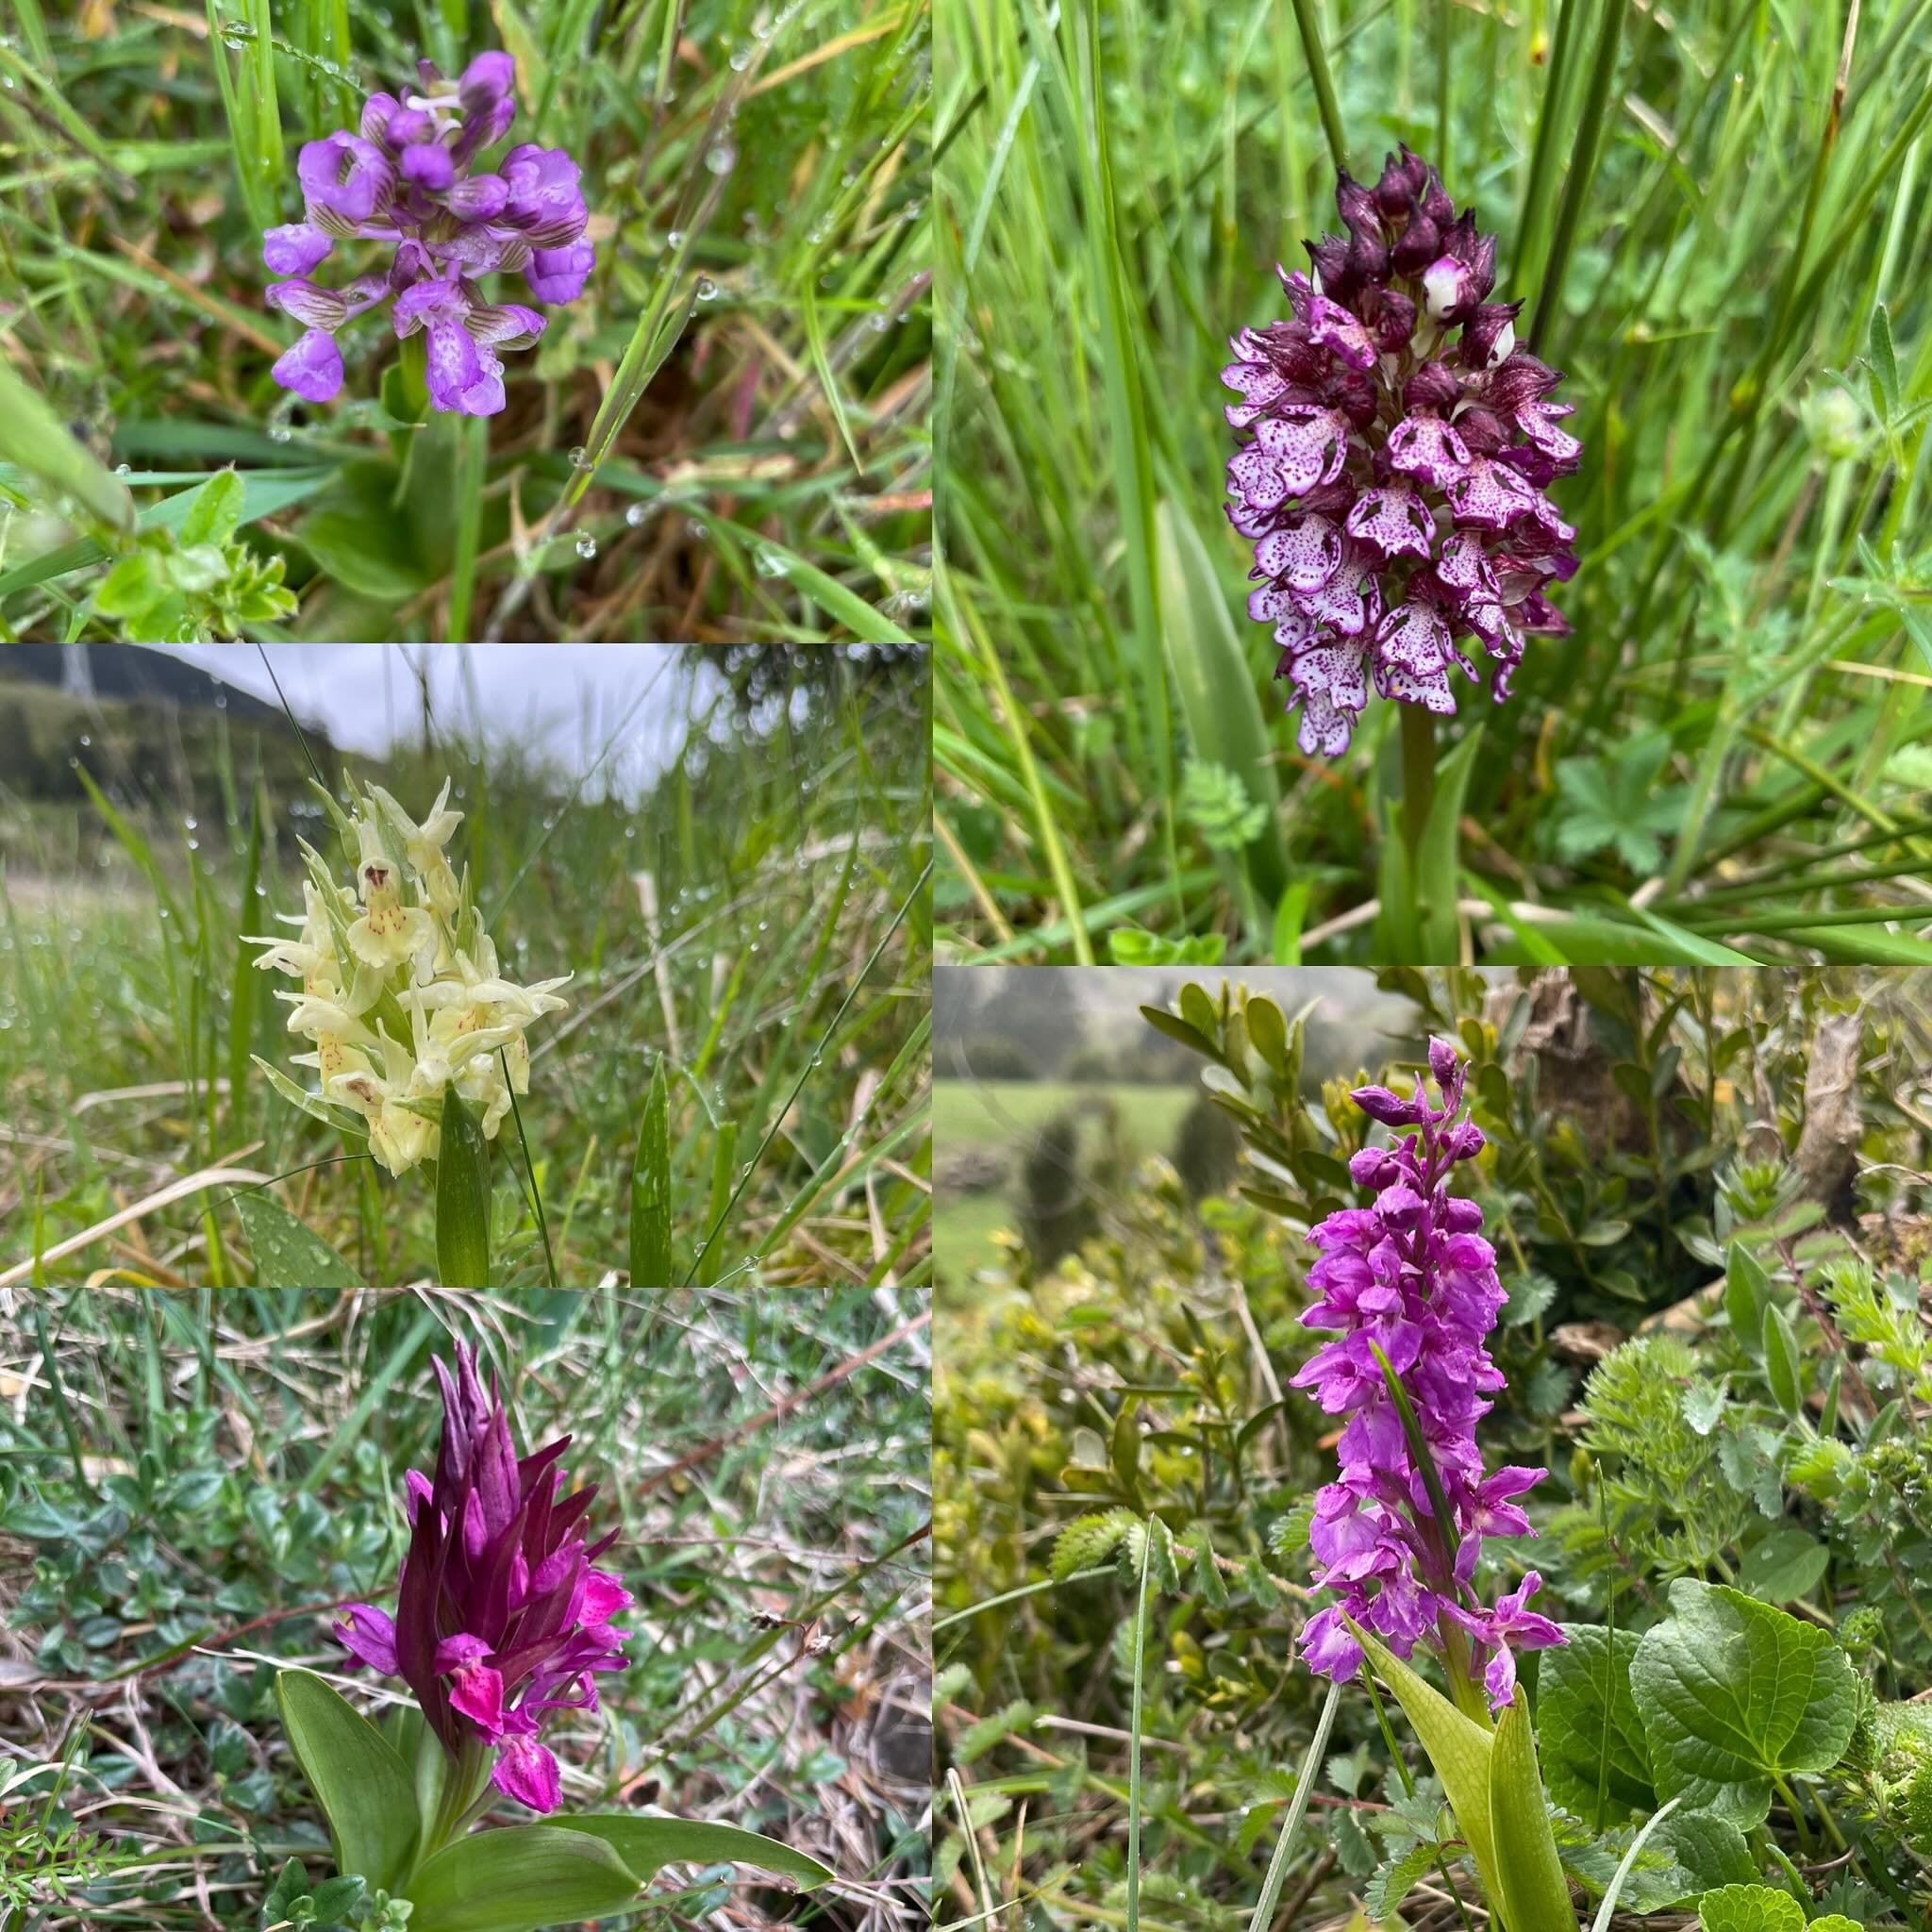 Pyrenees Wild Orchids.  A few we don&rsquo;t get in areas of Northern Spain. #wildflowers #flowers #orchids #wildorchids #nature #naturephotography #naturelovers #Spain #SpainTour #spainnature